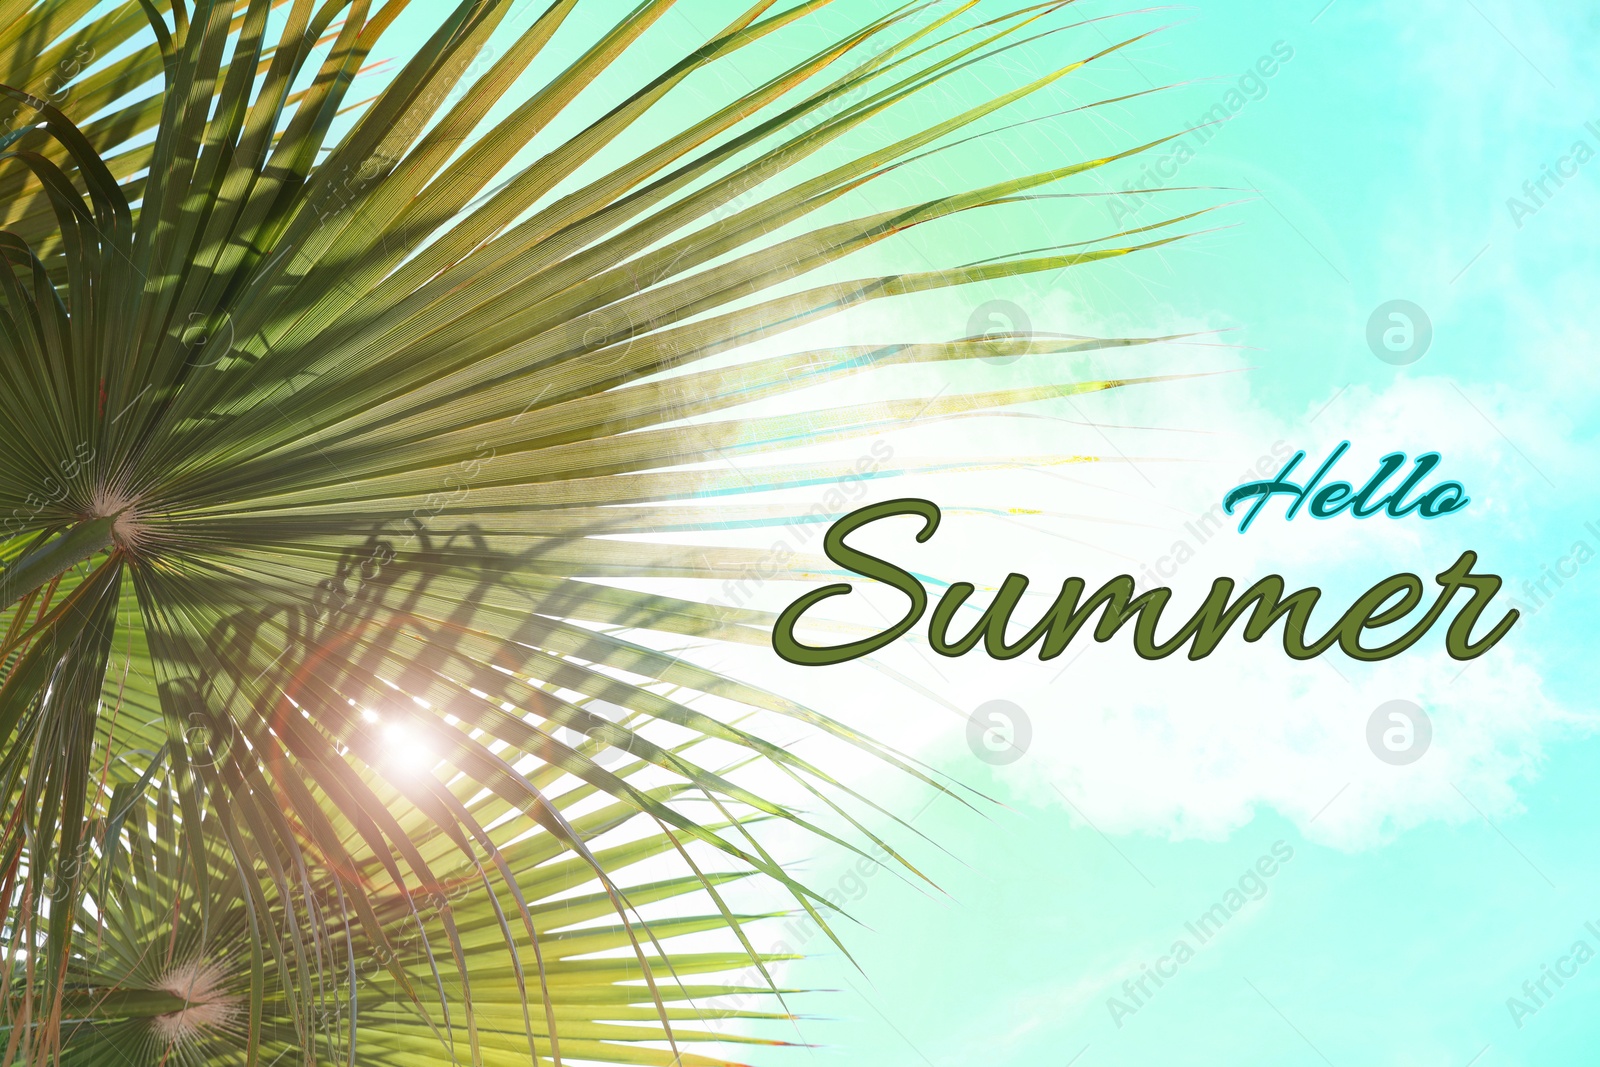 Image of Hello Summer text against palms and bright sky on sunny day